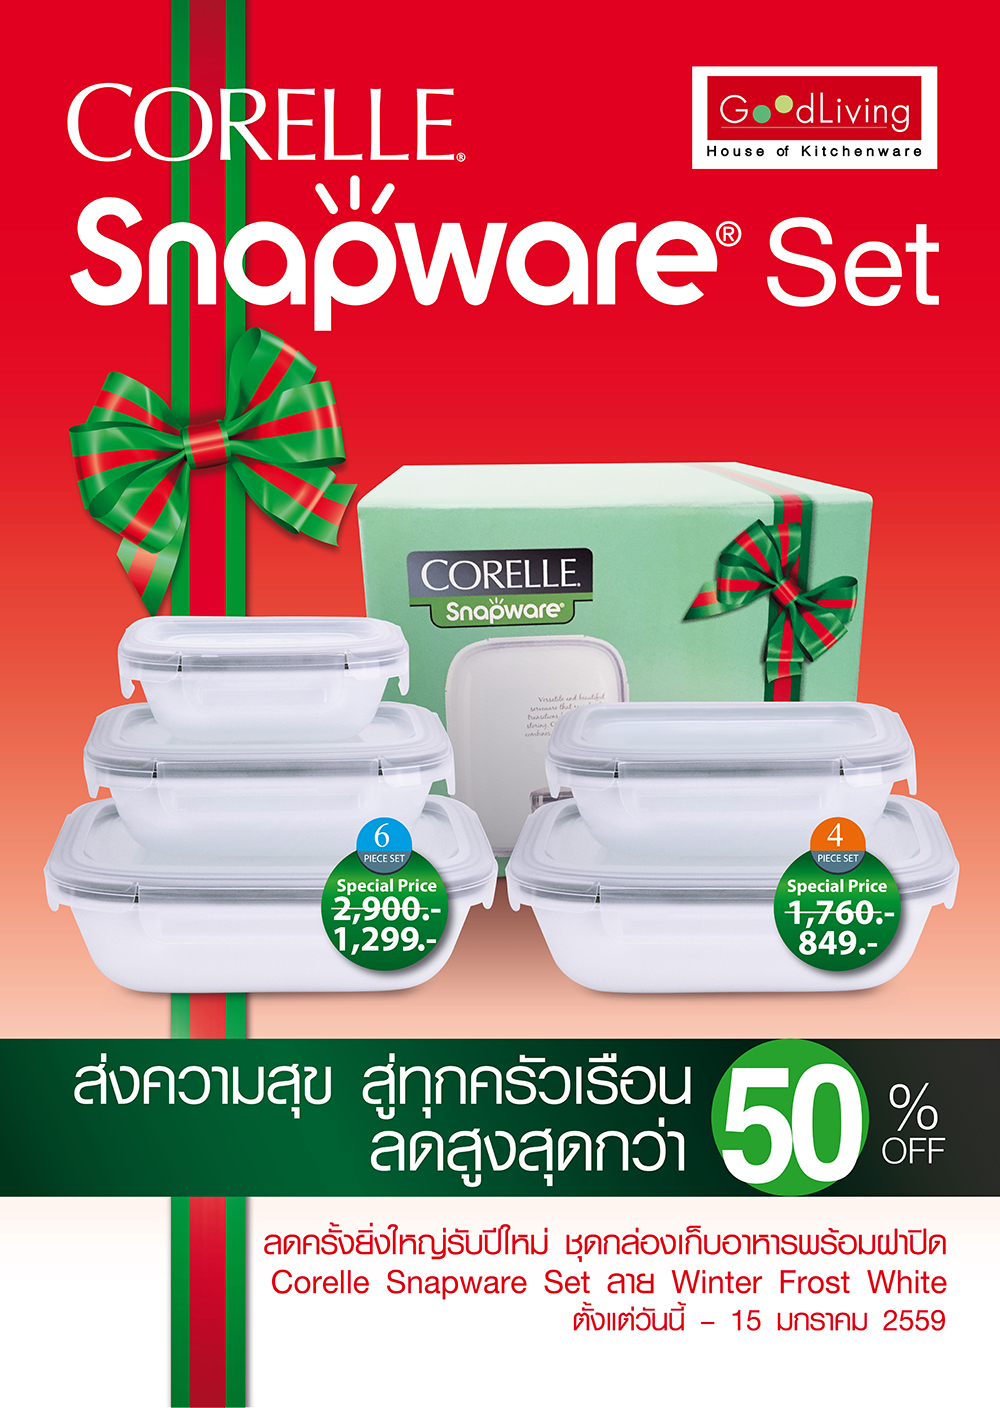 Bring happiness to your home with our new Special New Year Gift Set Corelle Snapware, Winter Frost White Collection Set of 4 and 6 pieces (including lids) On Sale for 50%, for limited time only!!! Great gifting ideas for your loved ones!